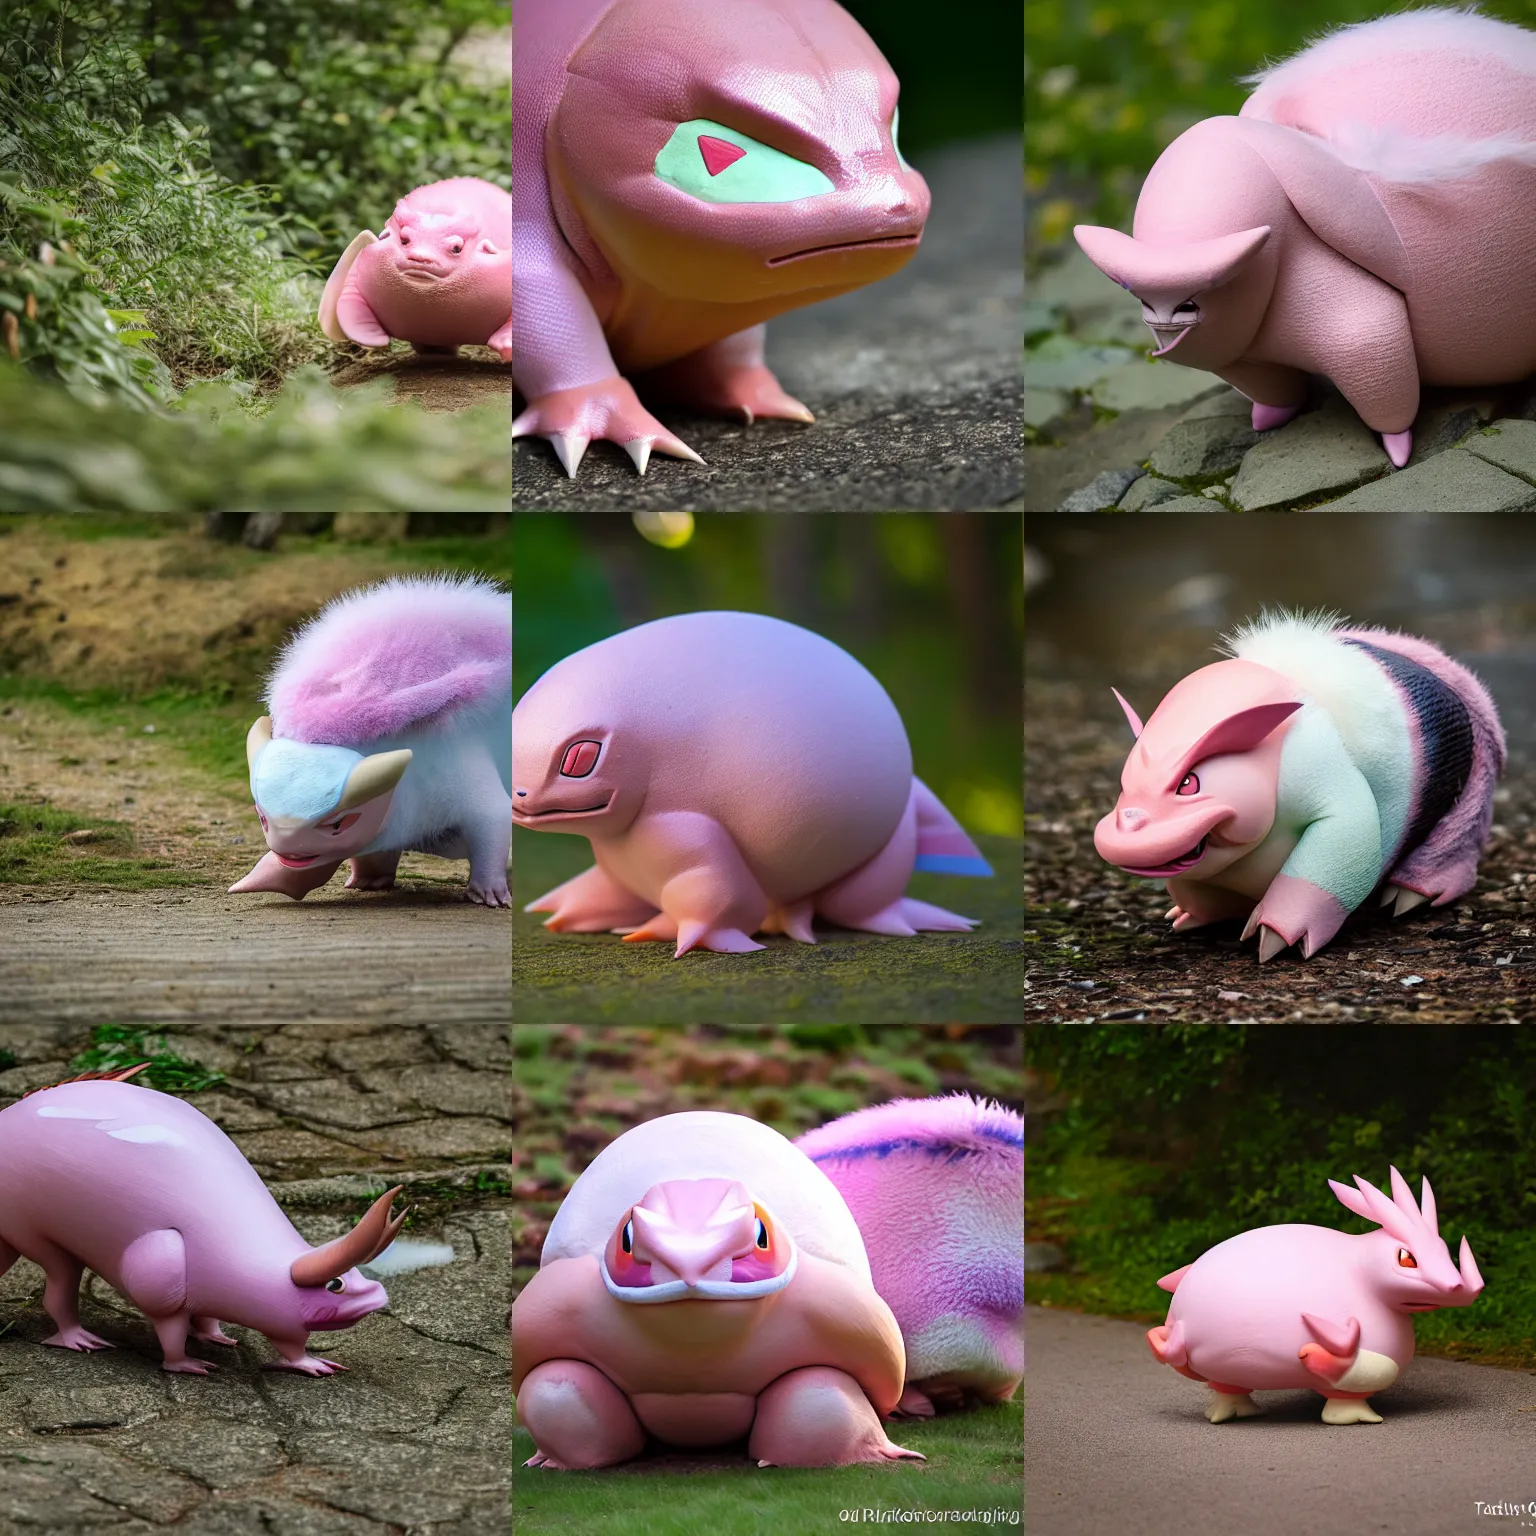 Prompt: The pokemon slowking as a real life animal, nature photography, outdoors, XF IQ4, f/1.4, ISO 200, 1/160s, 8K, RAW, unedited